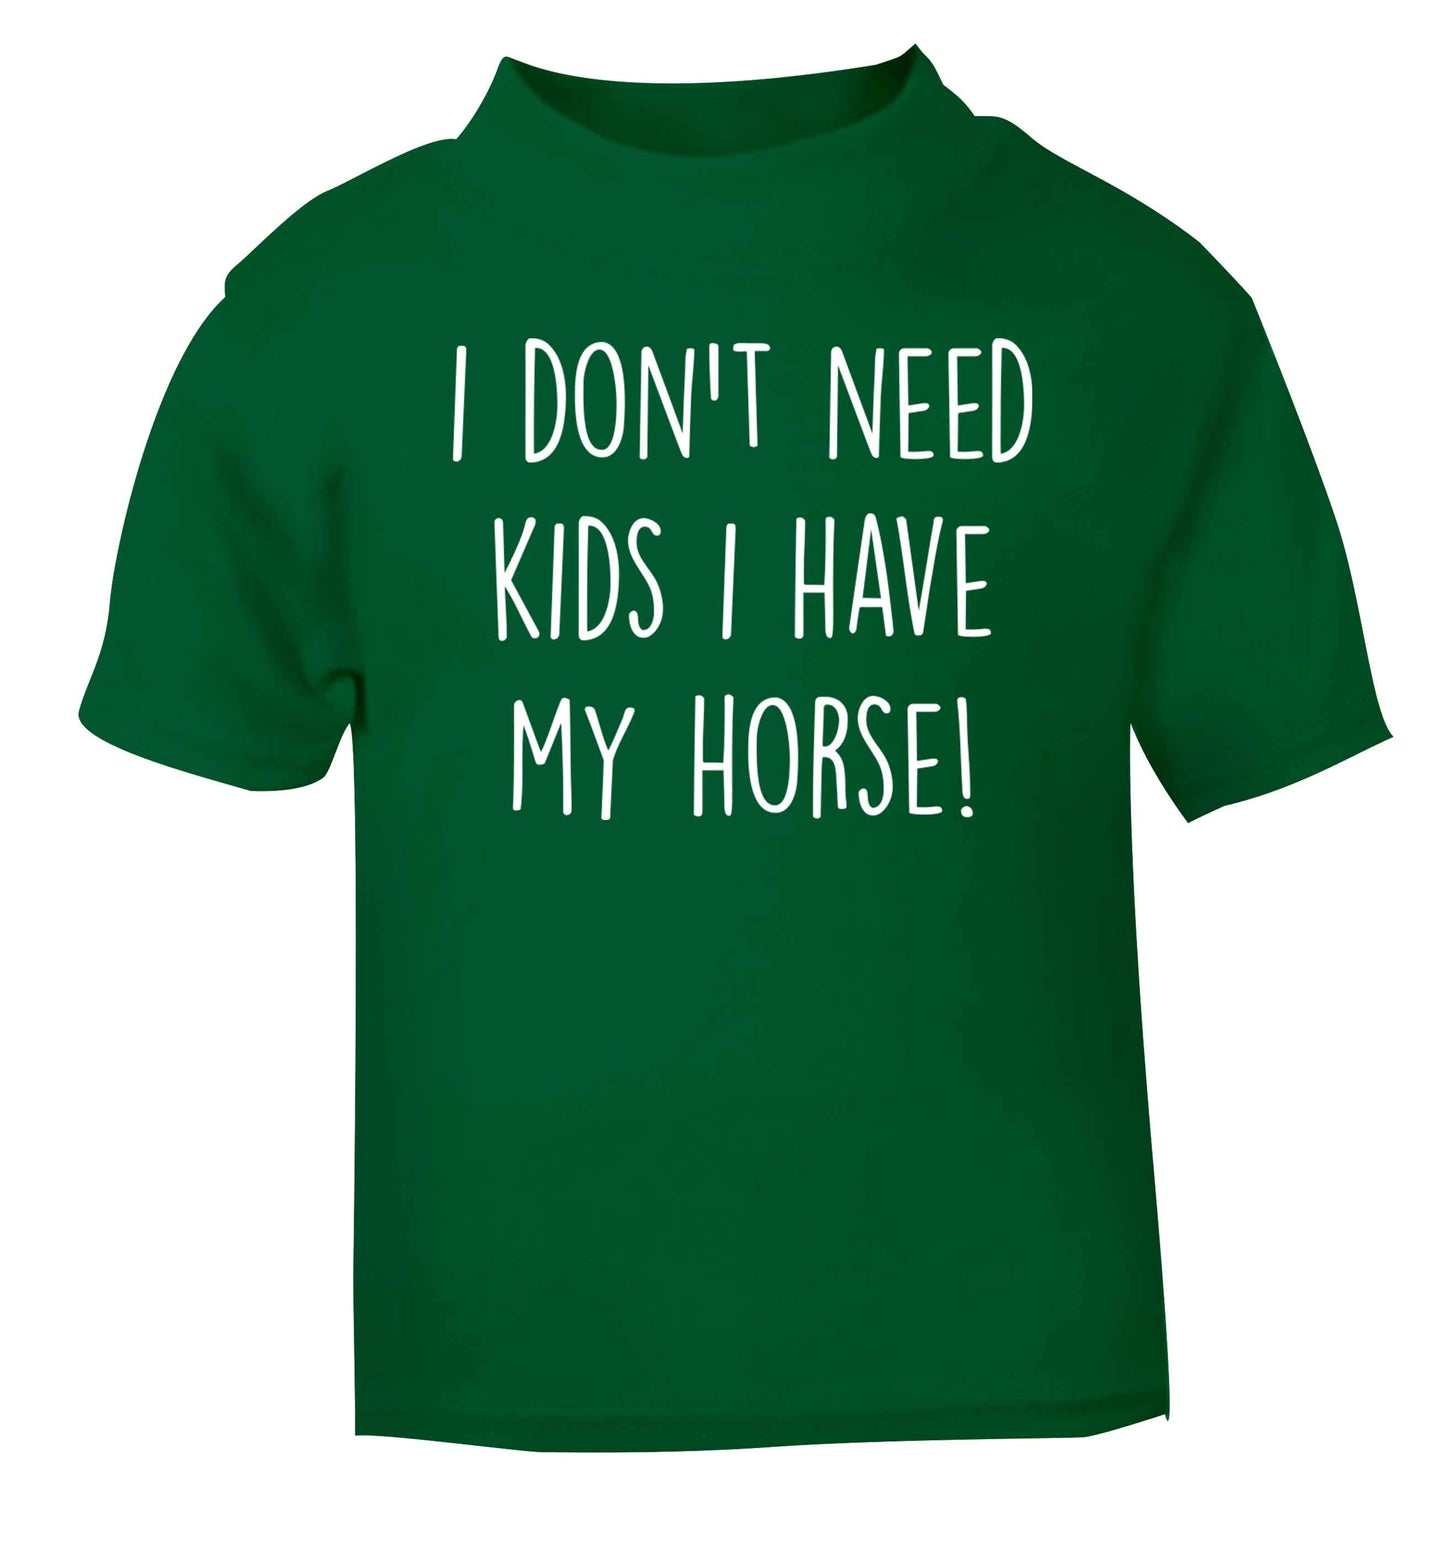 I don't need kids I have my horse green baby toddler Tshirt 2 Years